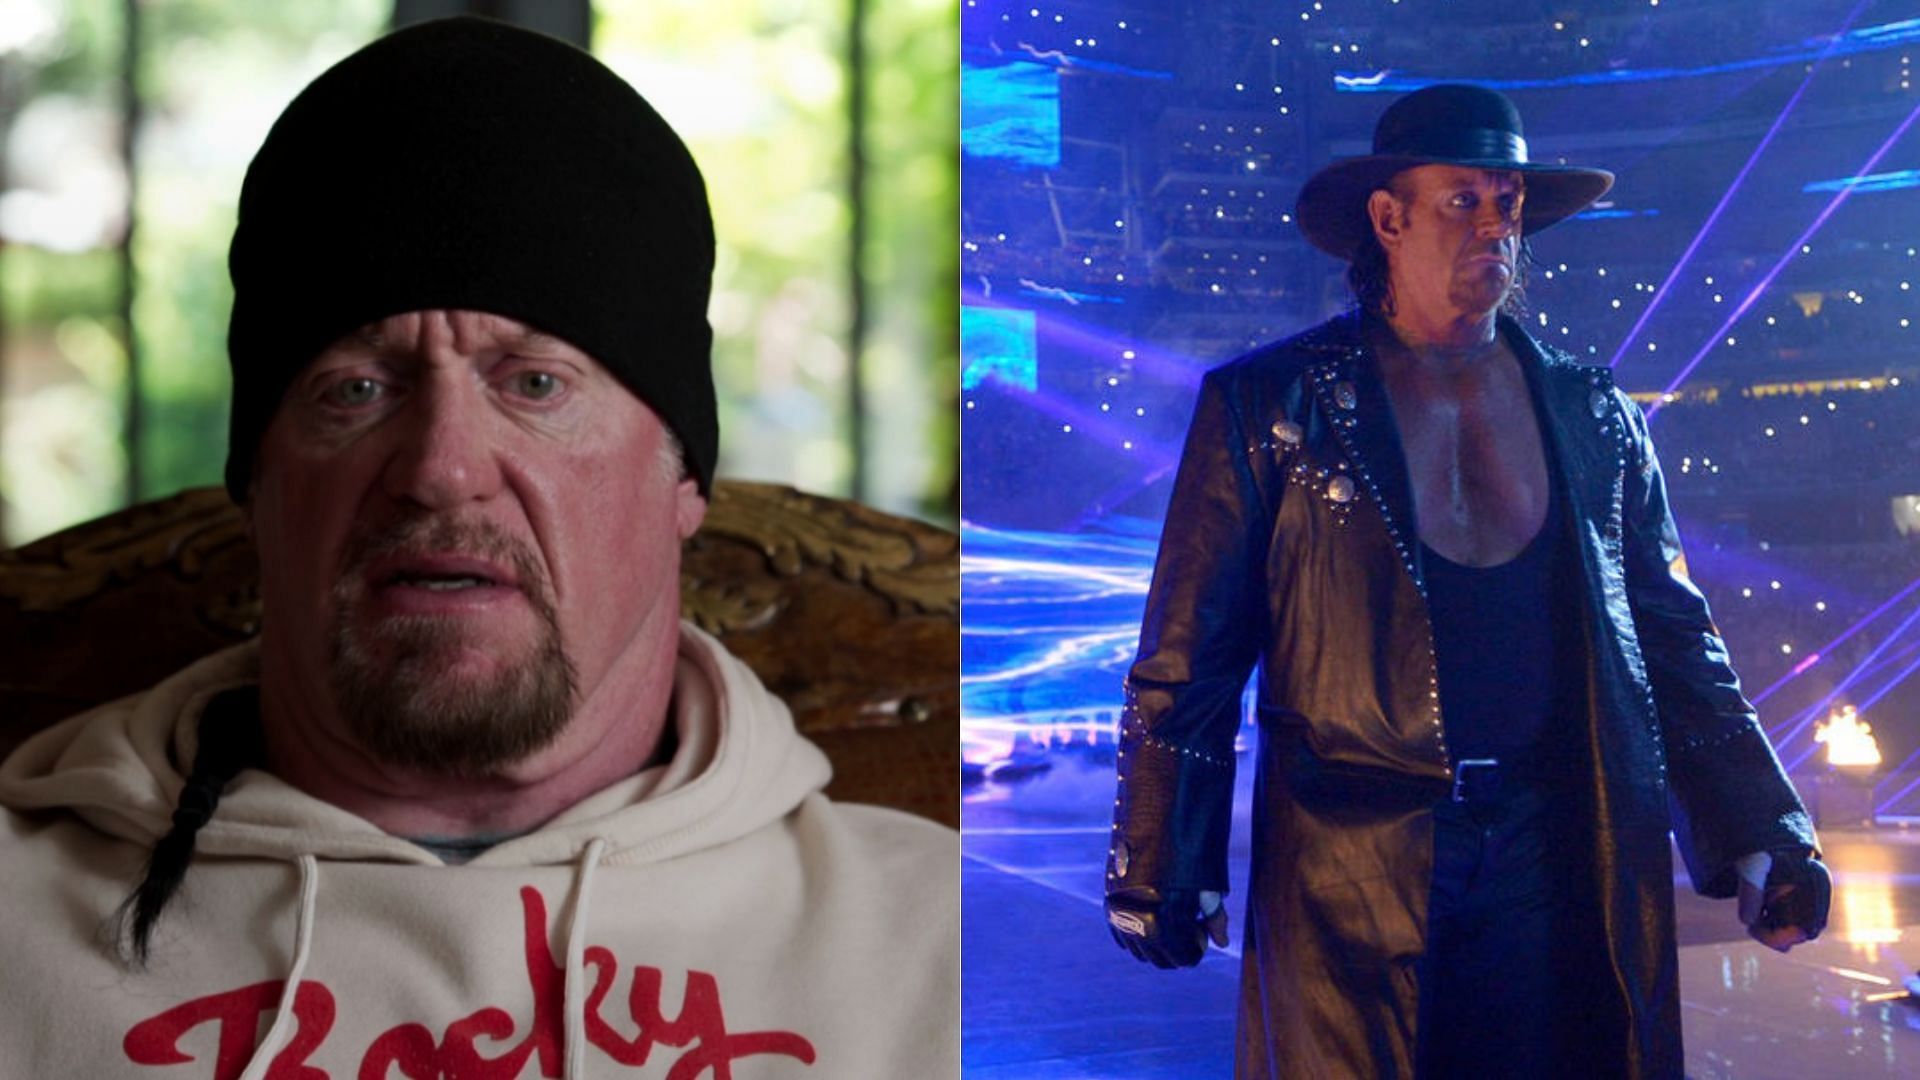 The Undertaker, real name Mark Calaway, has not wrestled since 2020